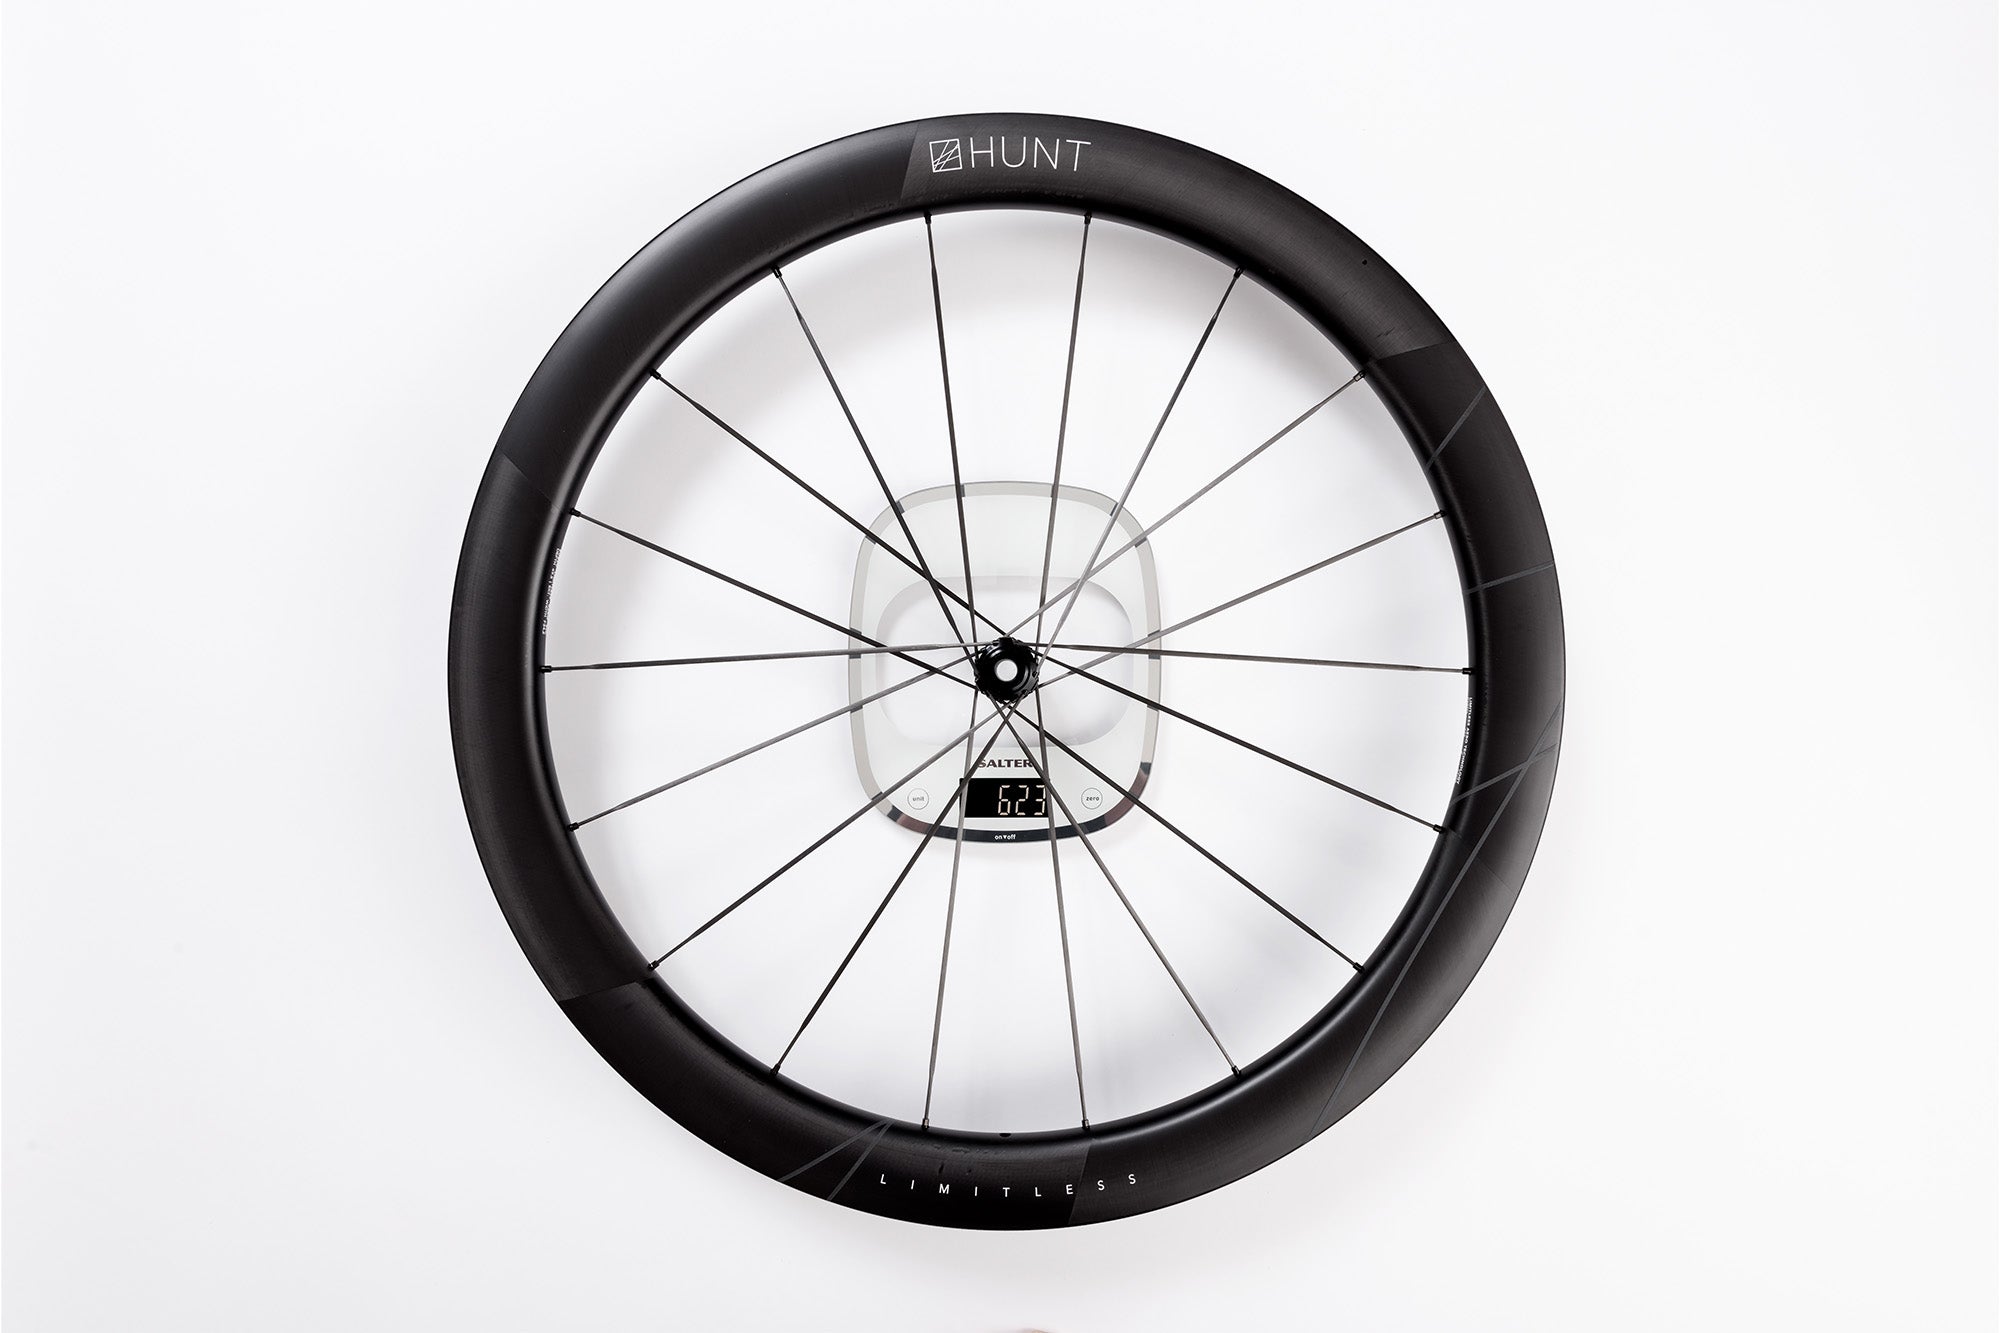 <h1>LOW SYSTEM WEIGHT - FRONT</h1><i>Innovation in rim layup technology, UD carbon spokes and hubs delivers class-leading low weight. Please note on scale images weighed without valves and tape. +/- 3% variation on wheelset weights can occur.</i>